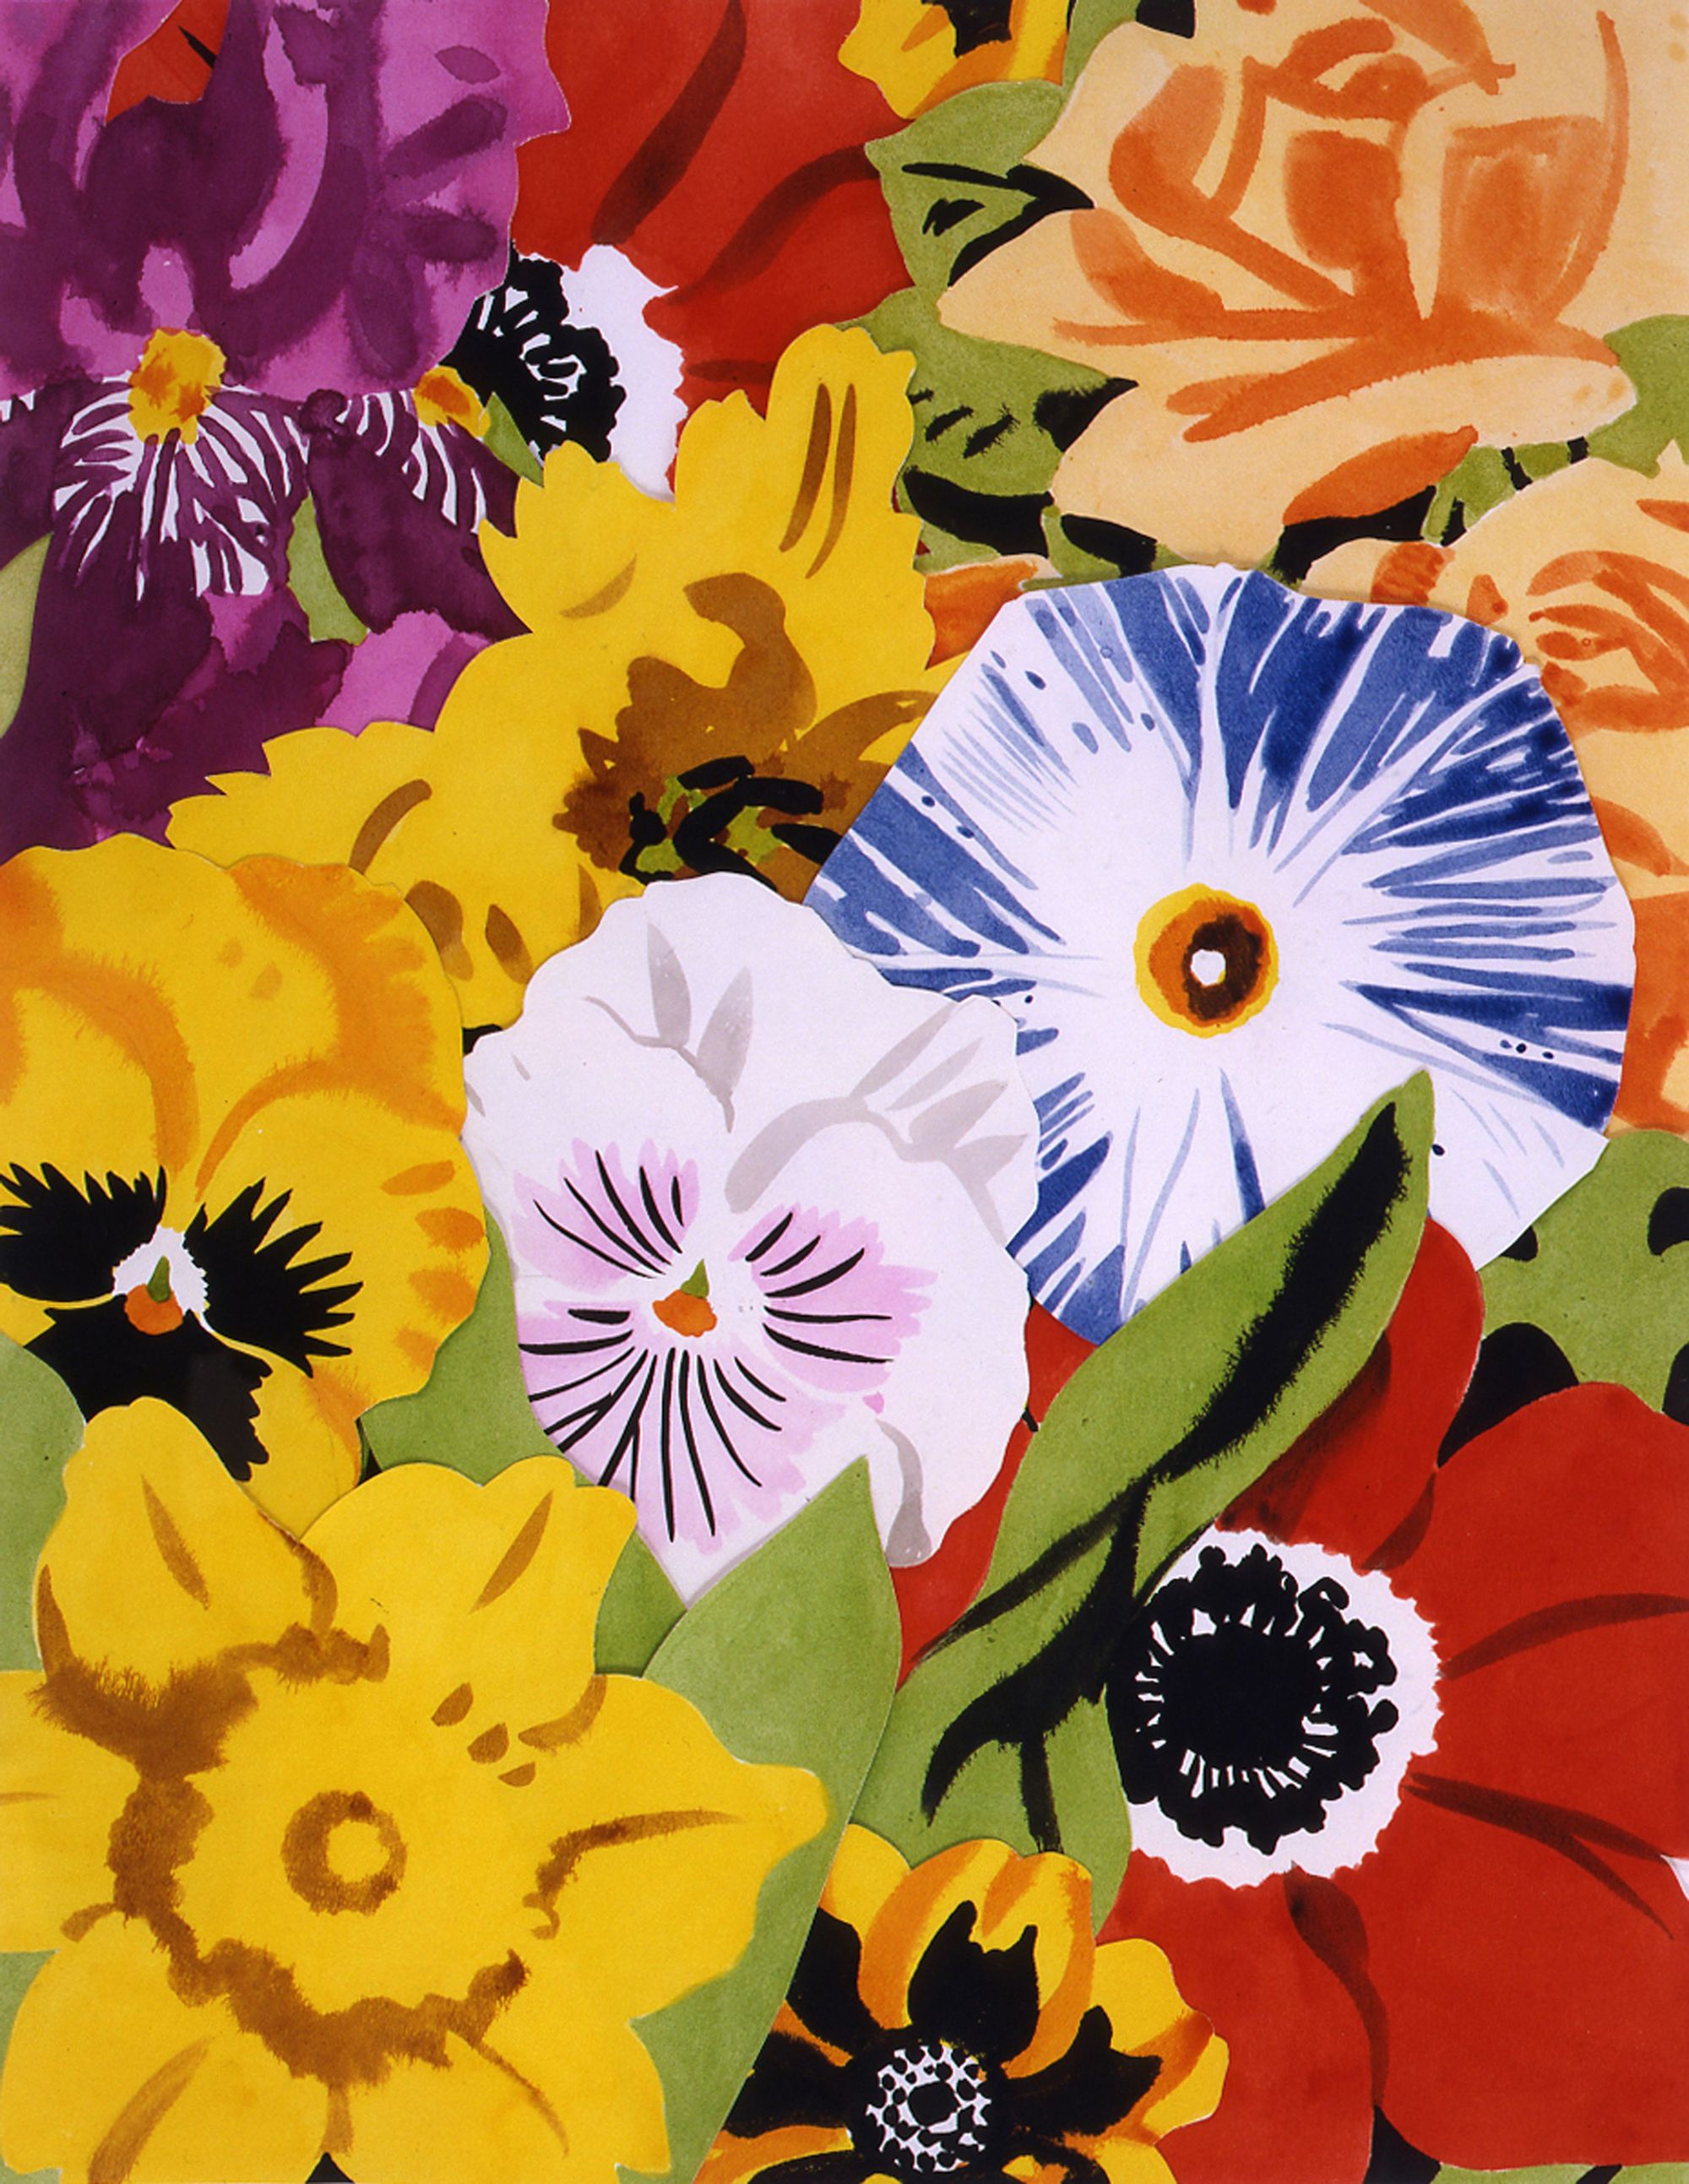 Joe Brainard Flower Painting, 1966 mixed media collage 13½ x 10½ inches.